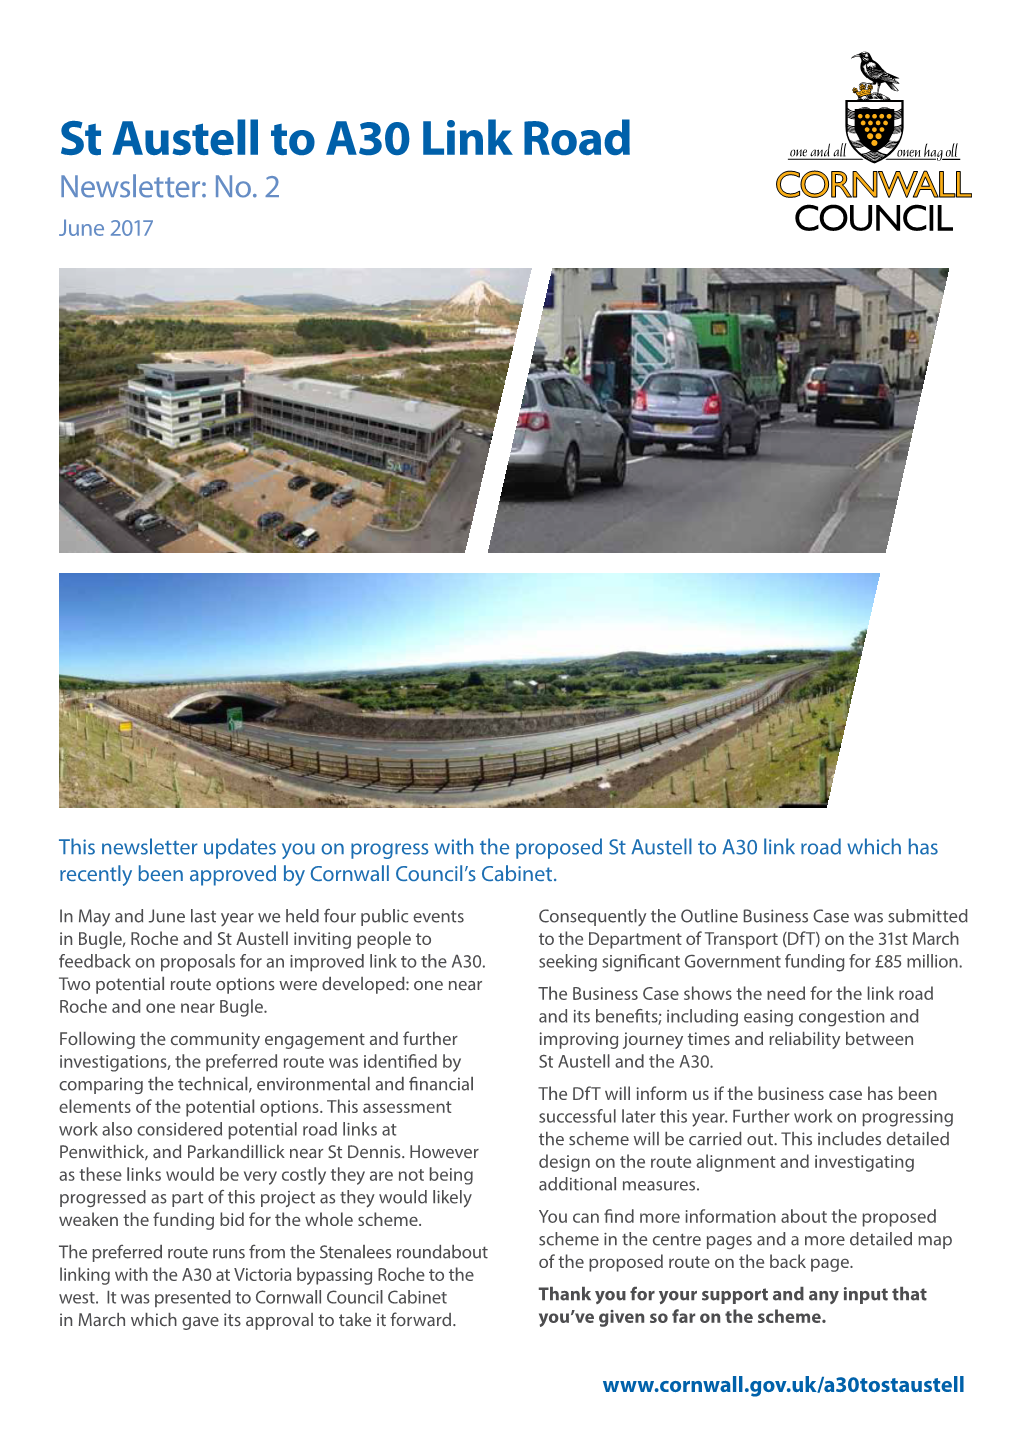 St Austell to A30 Link Road Newsletter: No